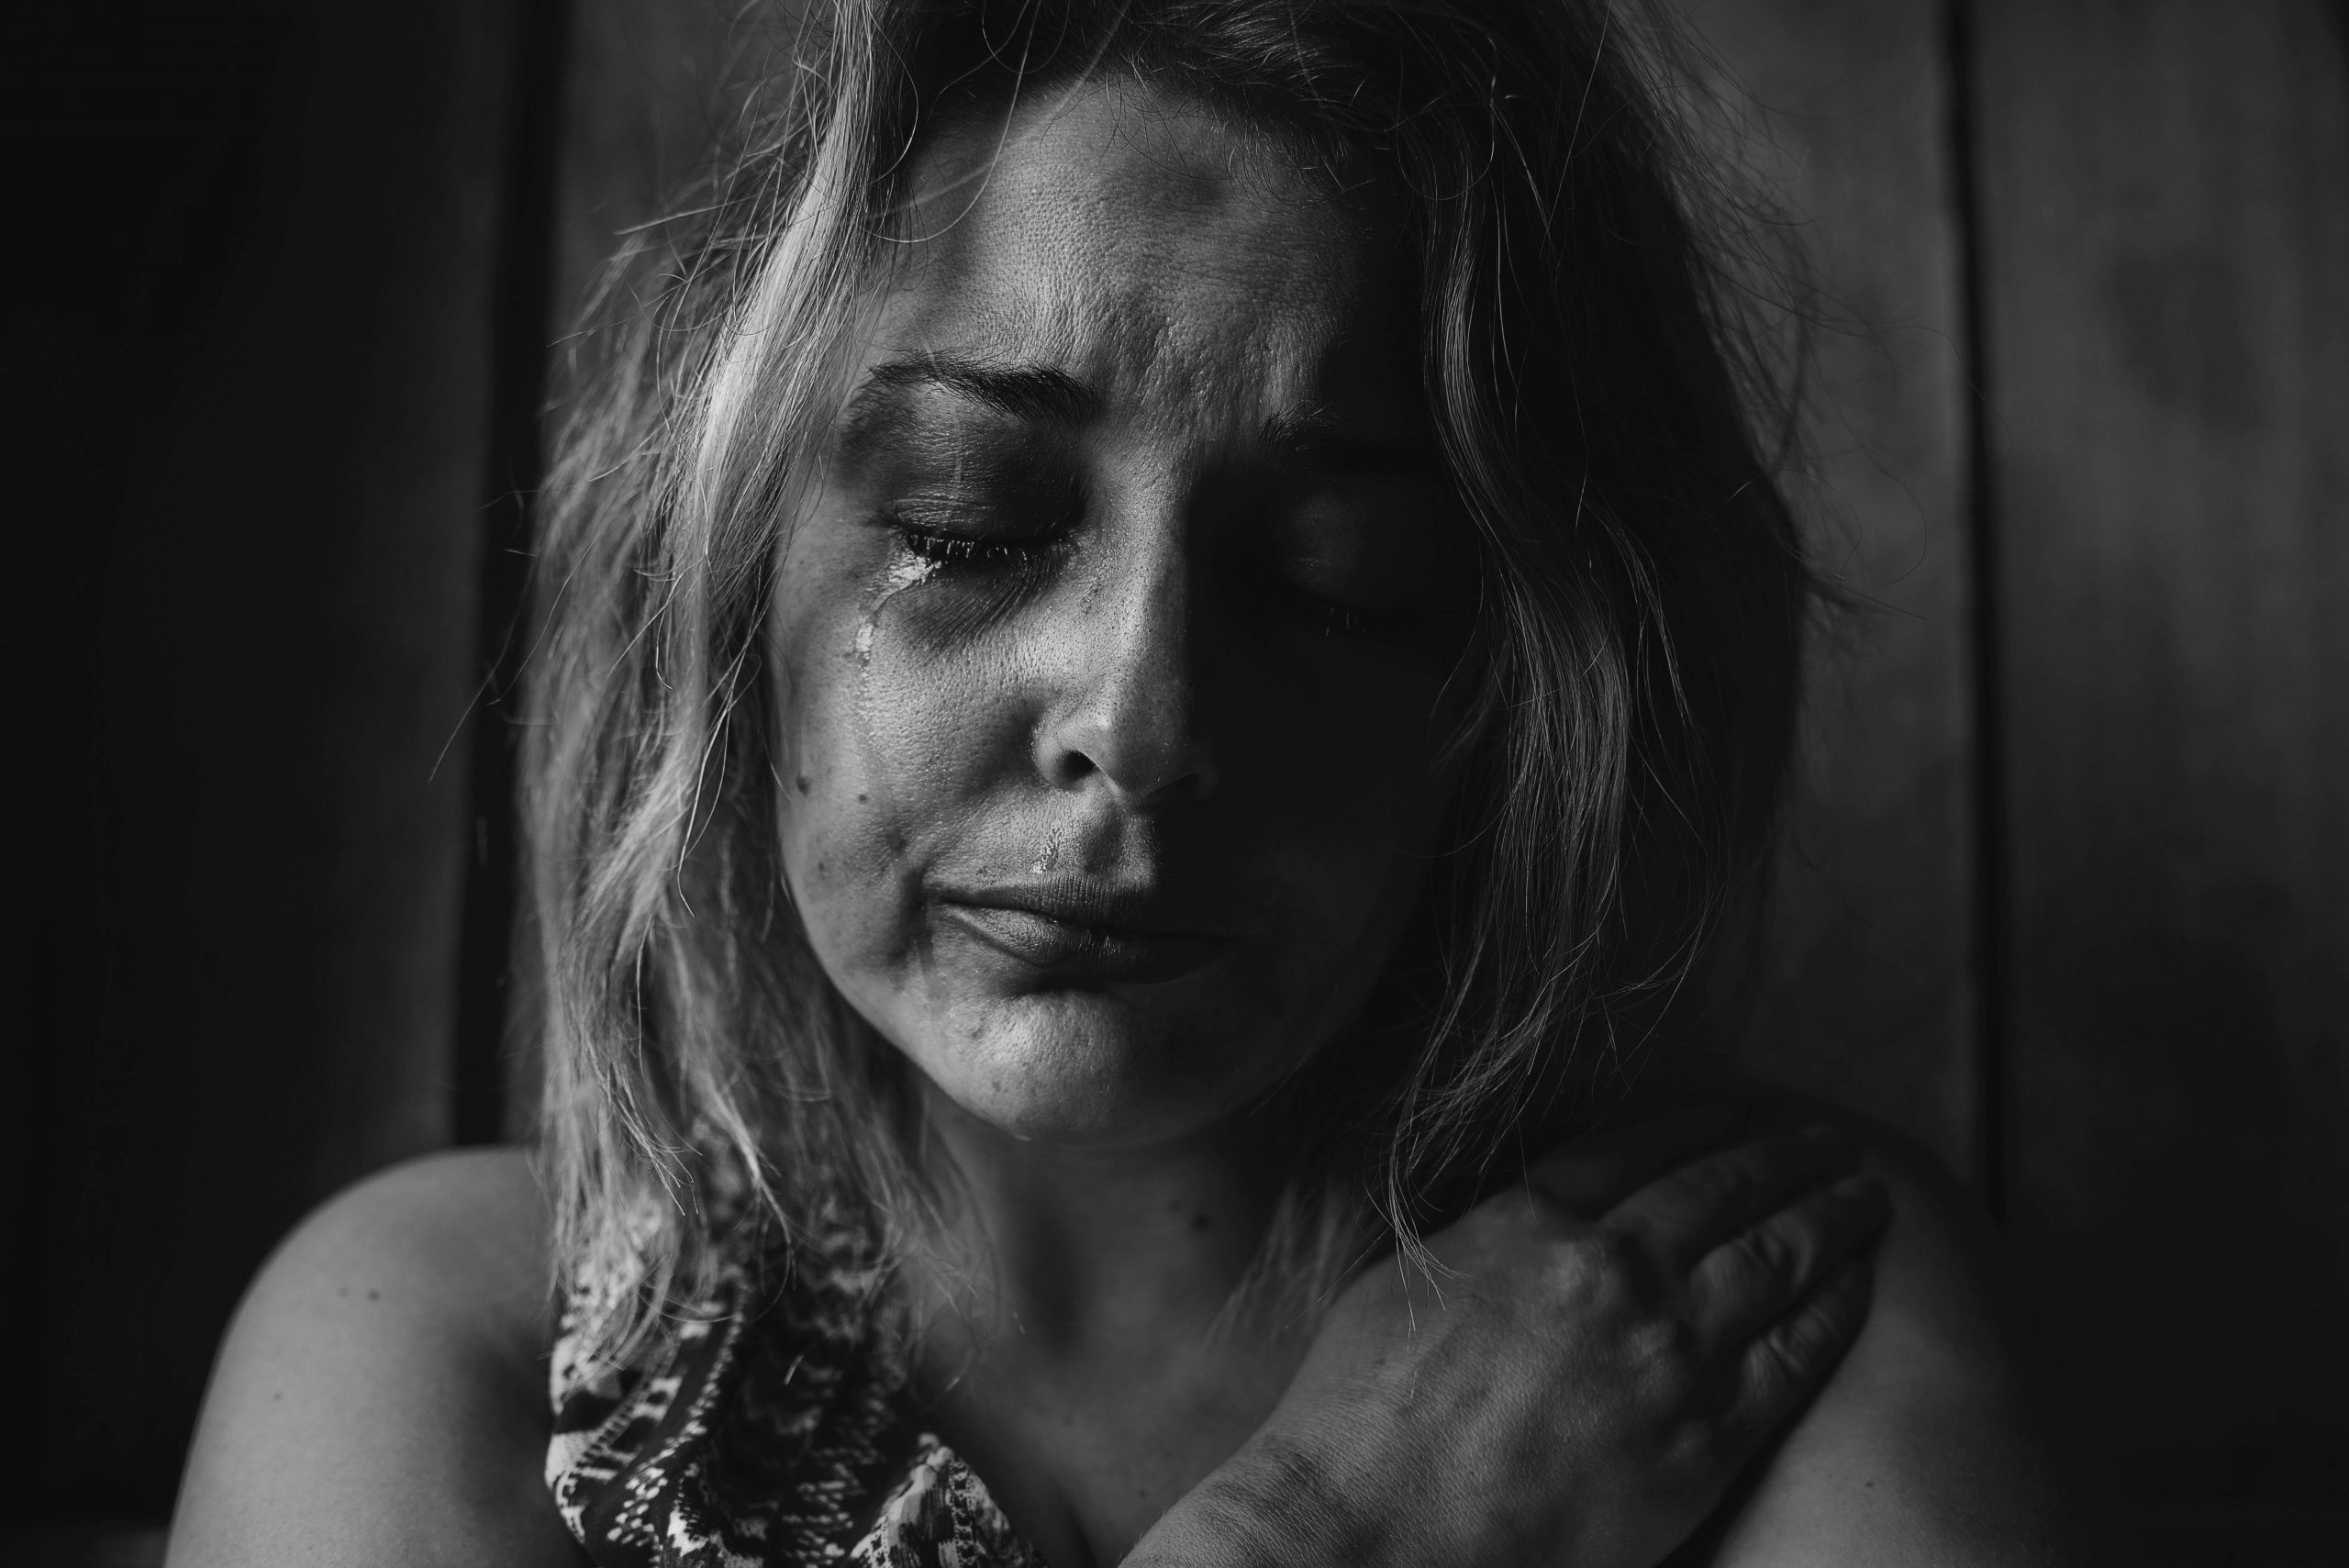 A close-up black and white image of a woman crying.